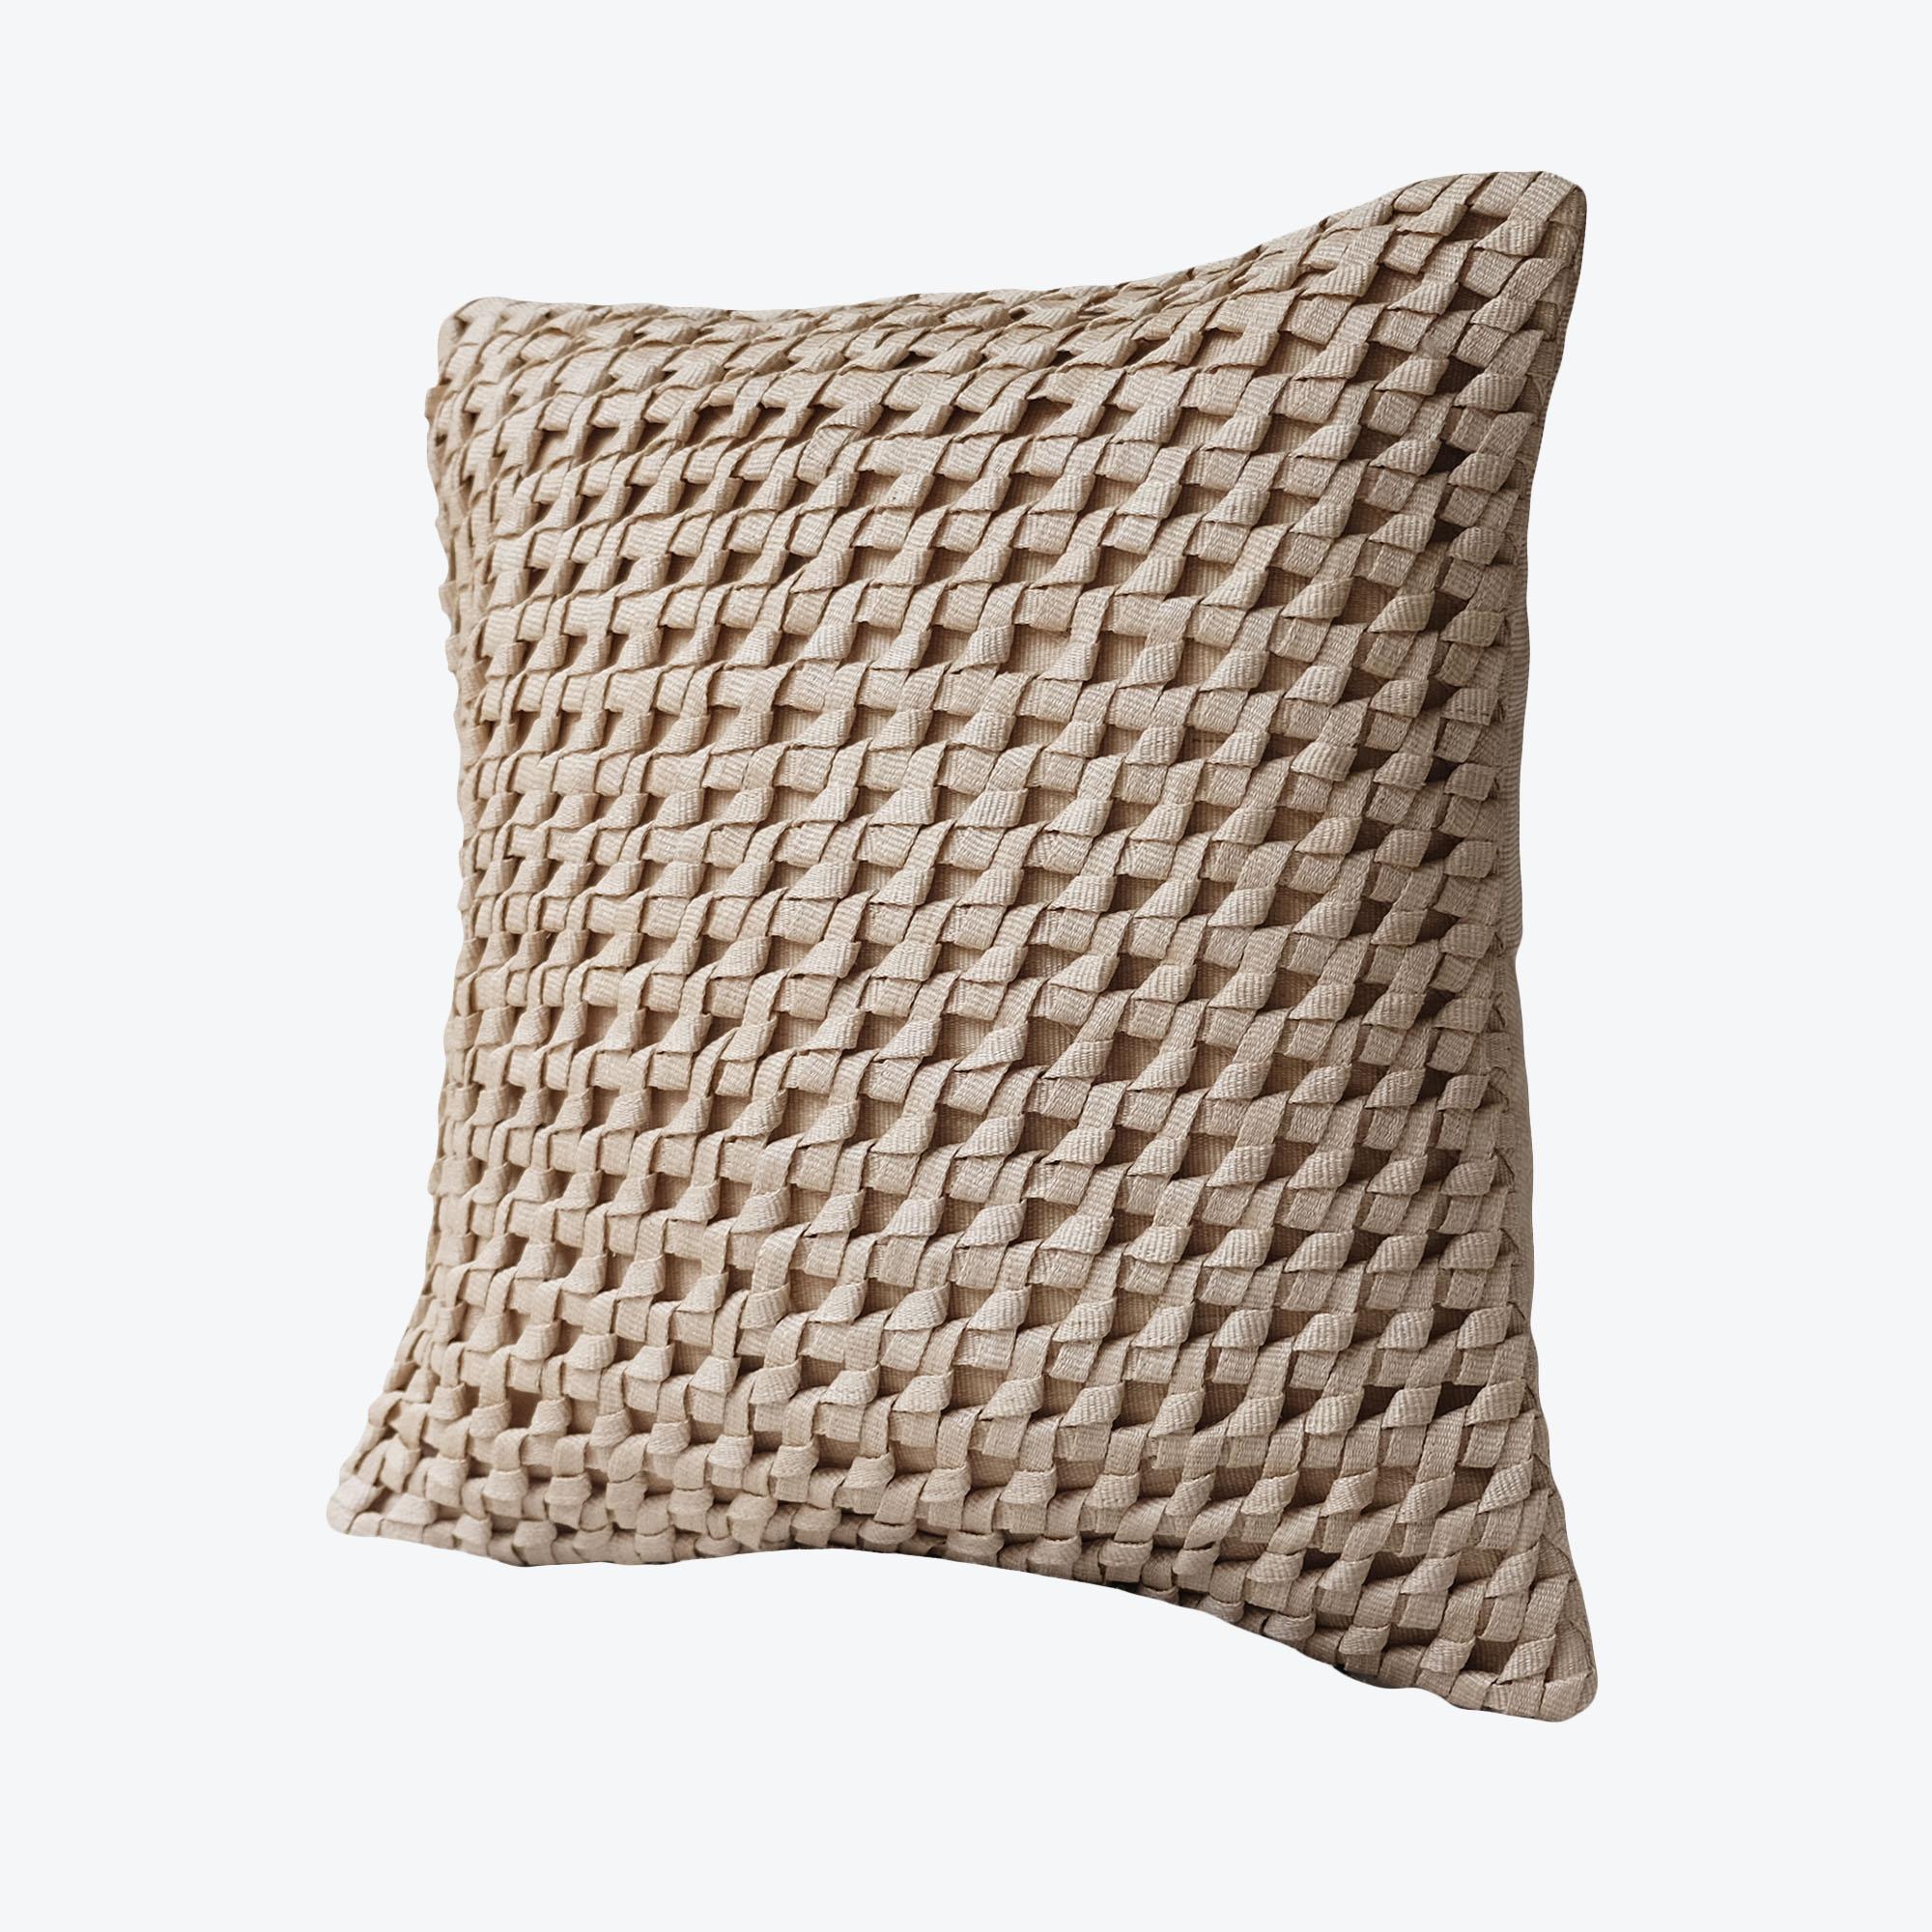 Handcrafted cushion cover made with naturally dyed and delicately woven T’nalak cloth from Abaca fibres and fastened with coconut shell buttons
Colour: light sand

Measures: 50 x 50 cm
19.7 x 19.7in
Recommended cushion filler: 61 x 61 cm / 24 x